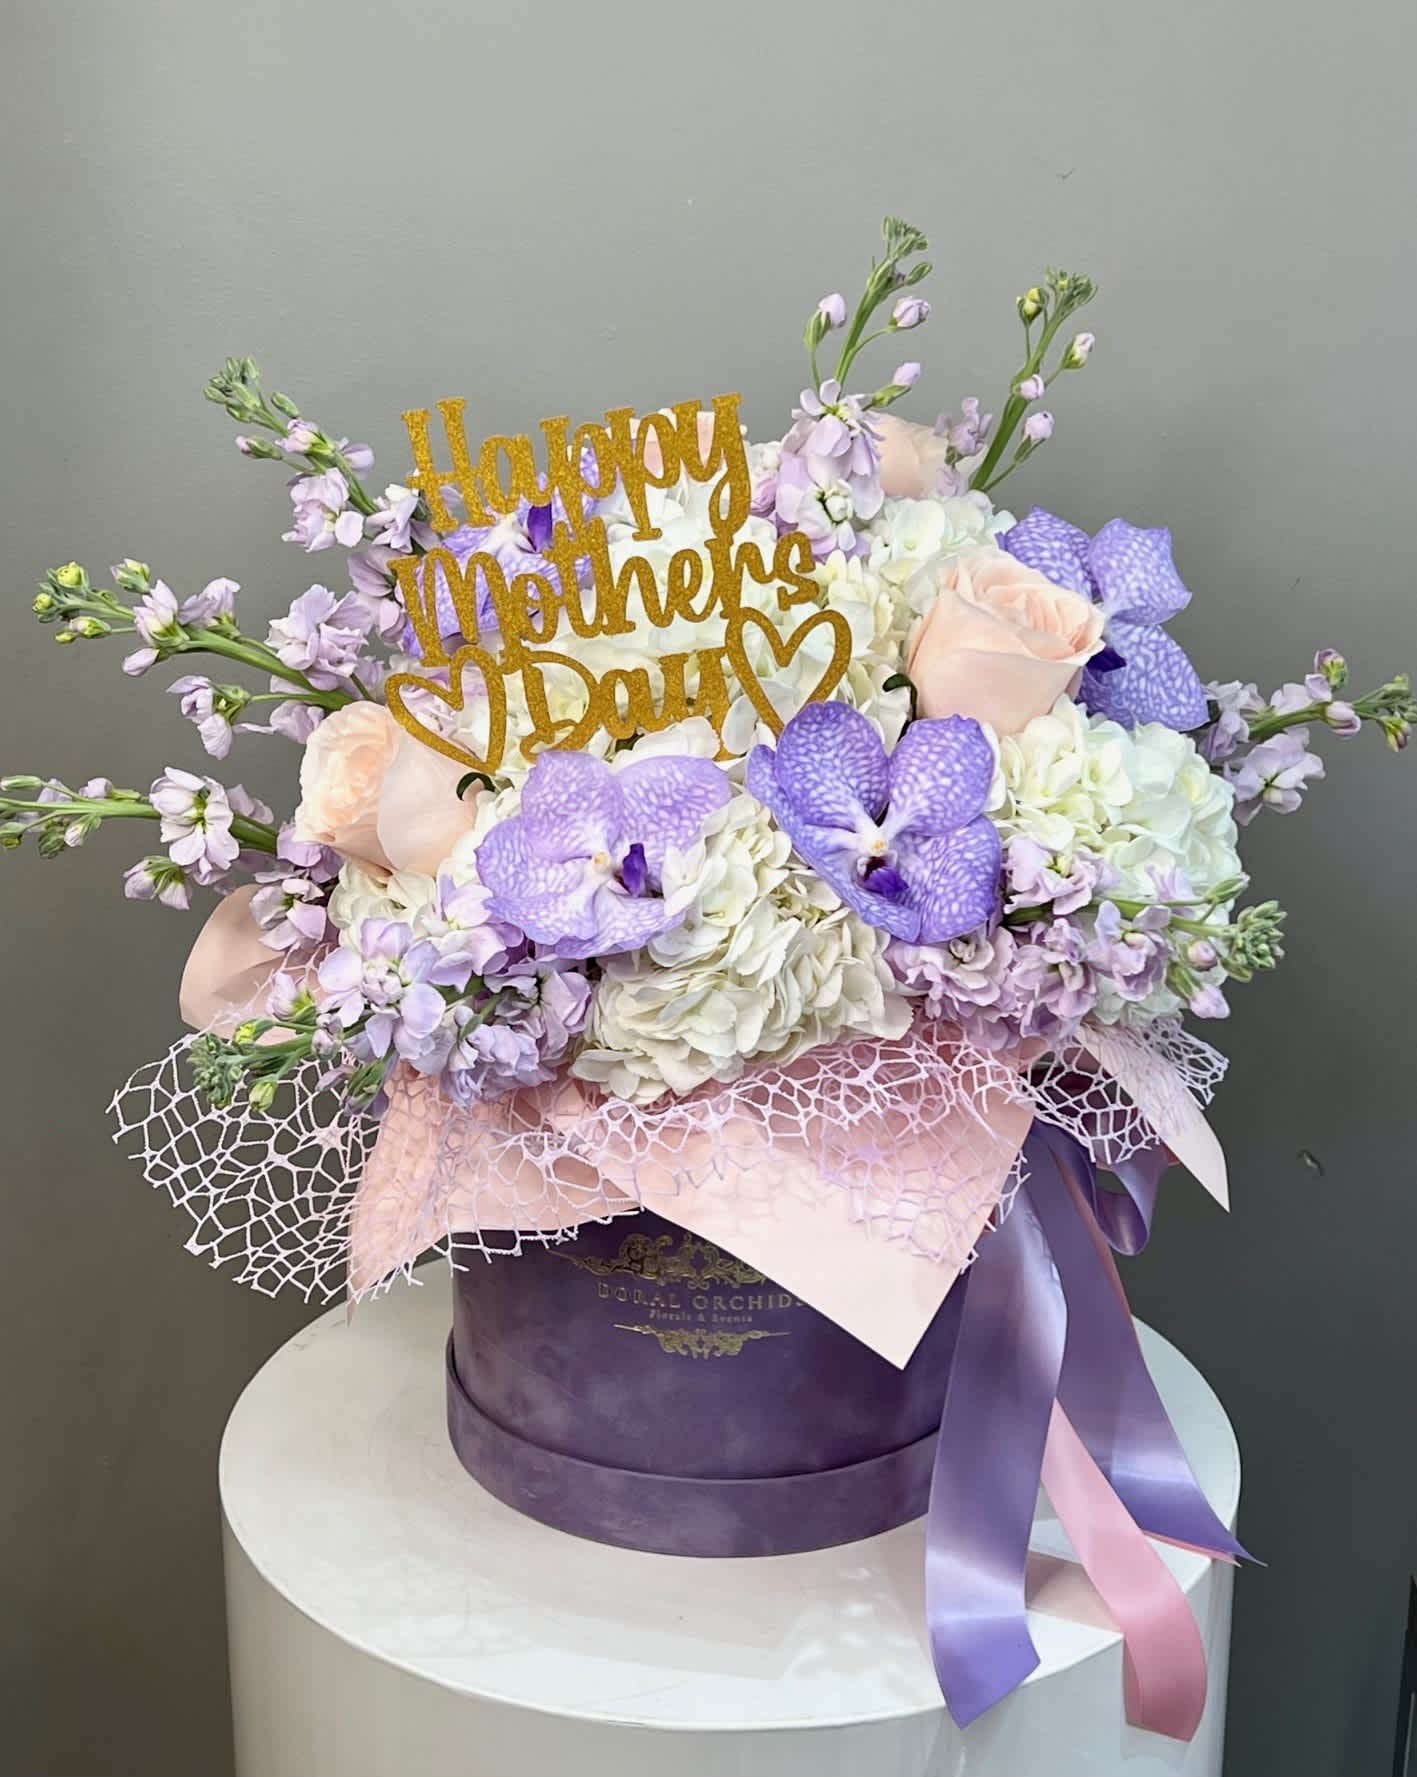 For My Mom - Magnificent arrangement of white, lavender and pink flowers in a trendy velvet box